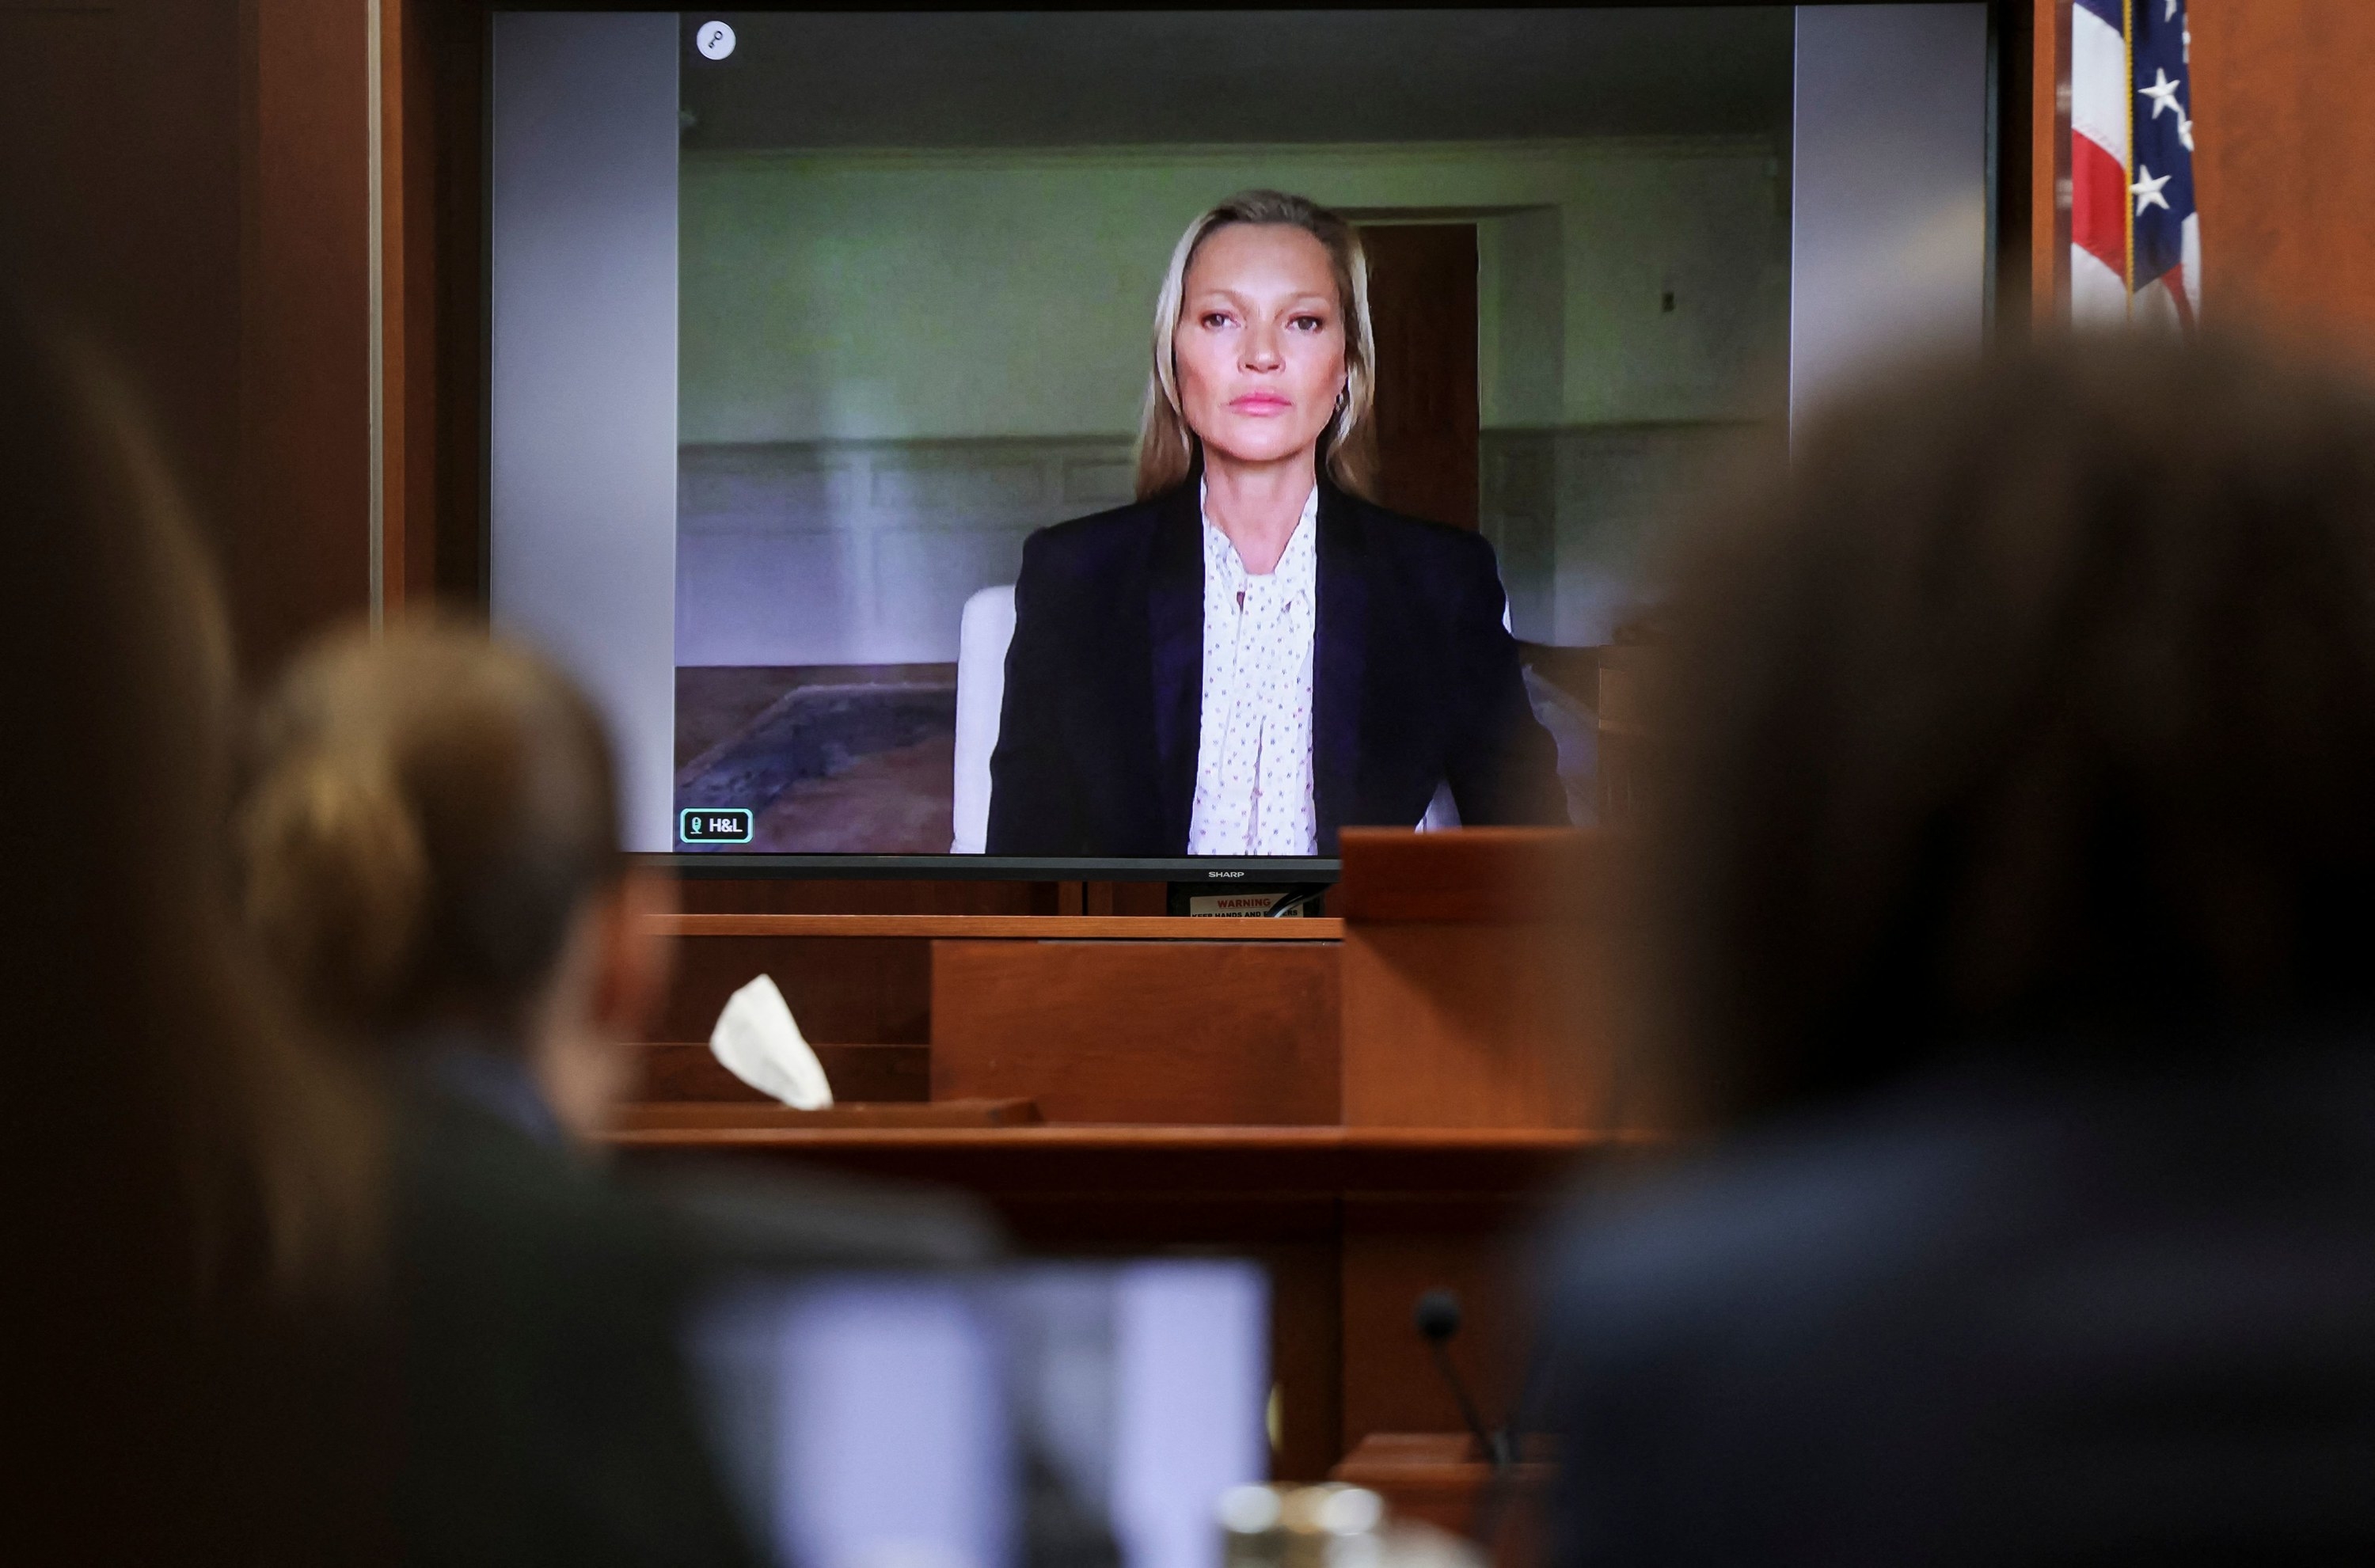 Kate Moss testifies via video link at the Fairfax County Circuit Courthouse in Fairfax, Virginia, on May 25, 2022.